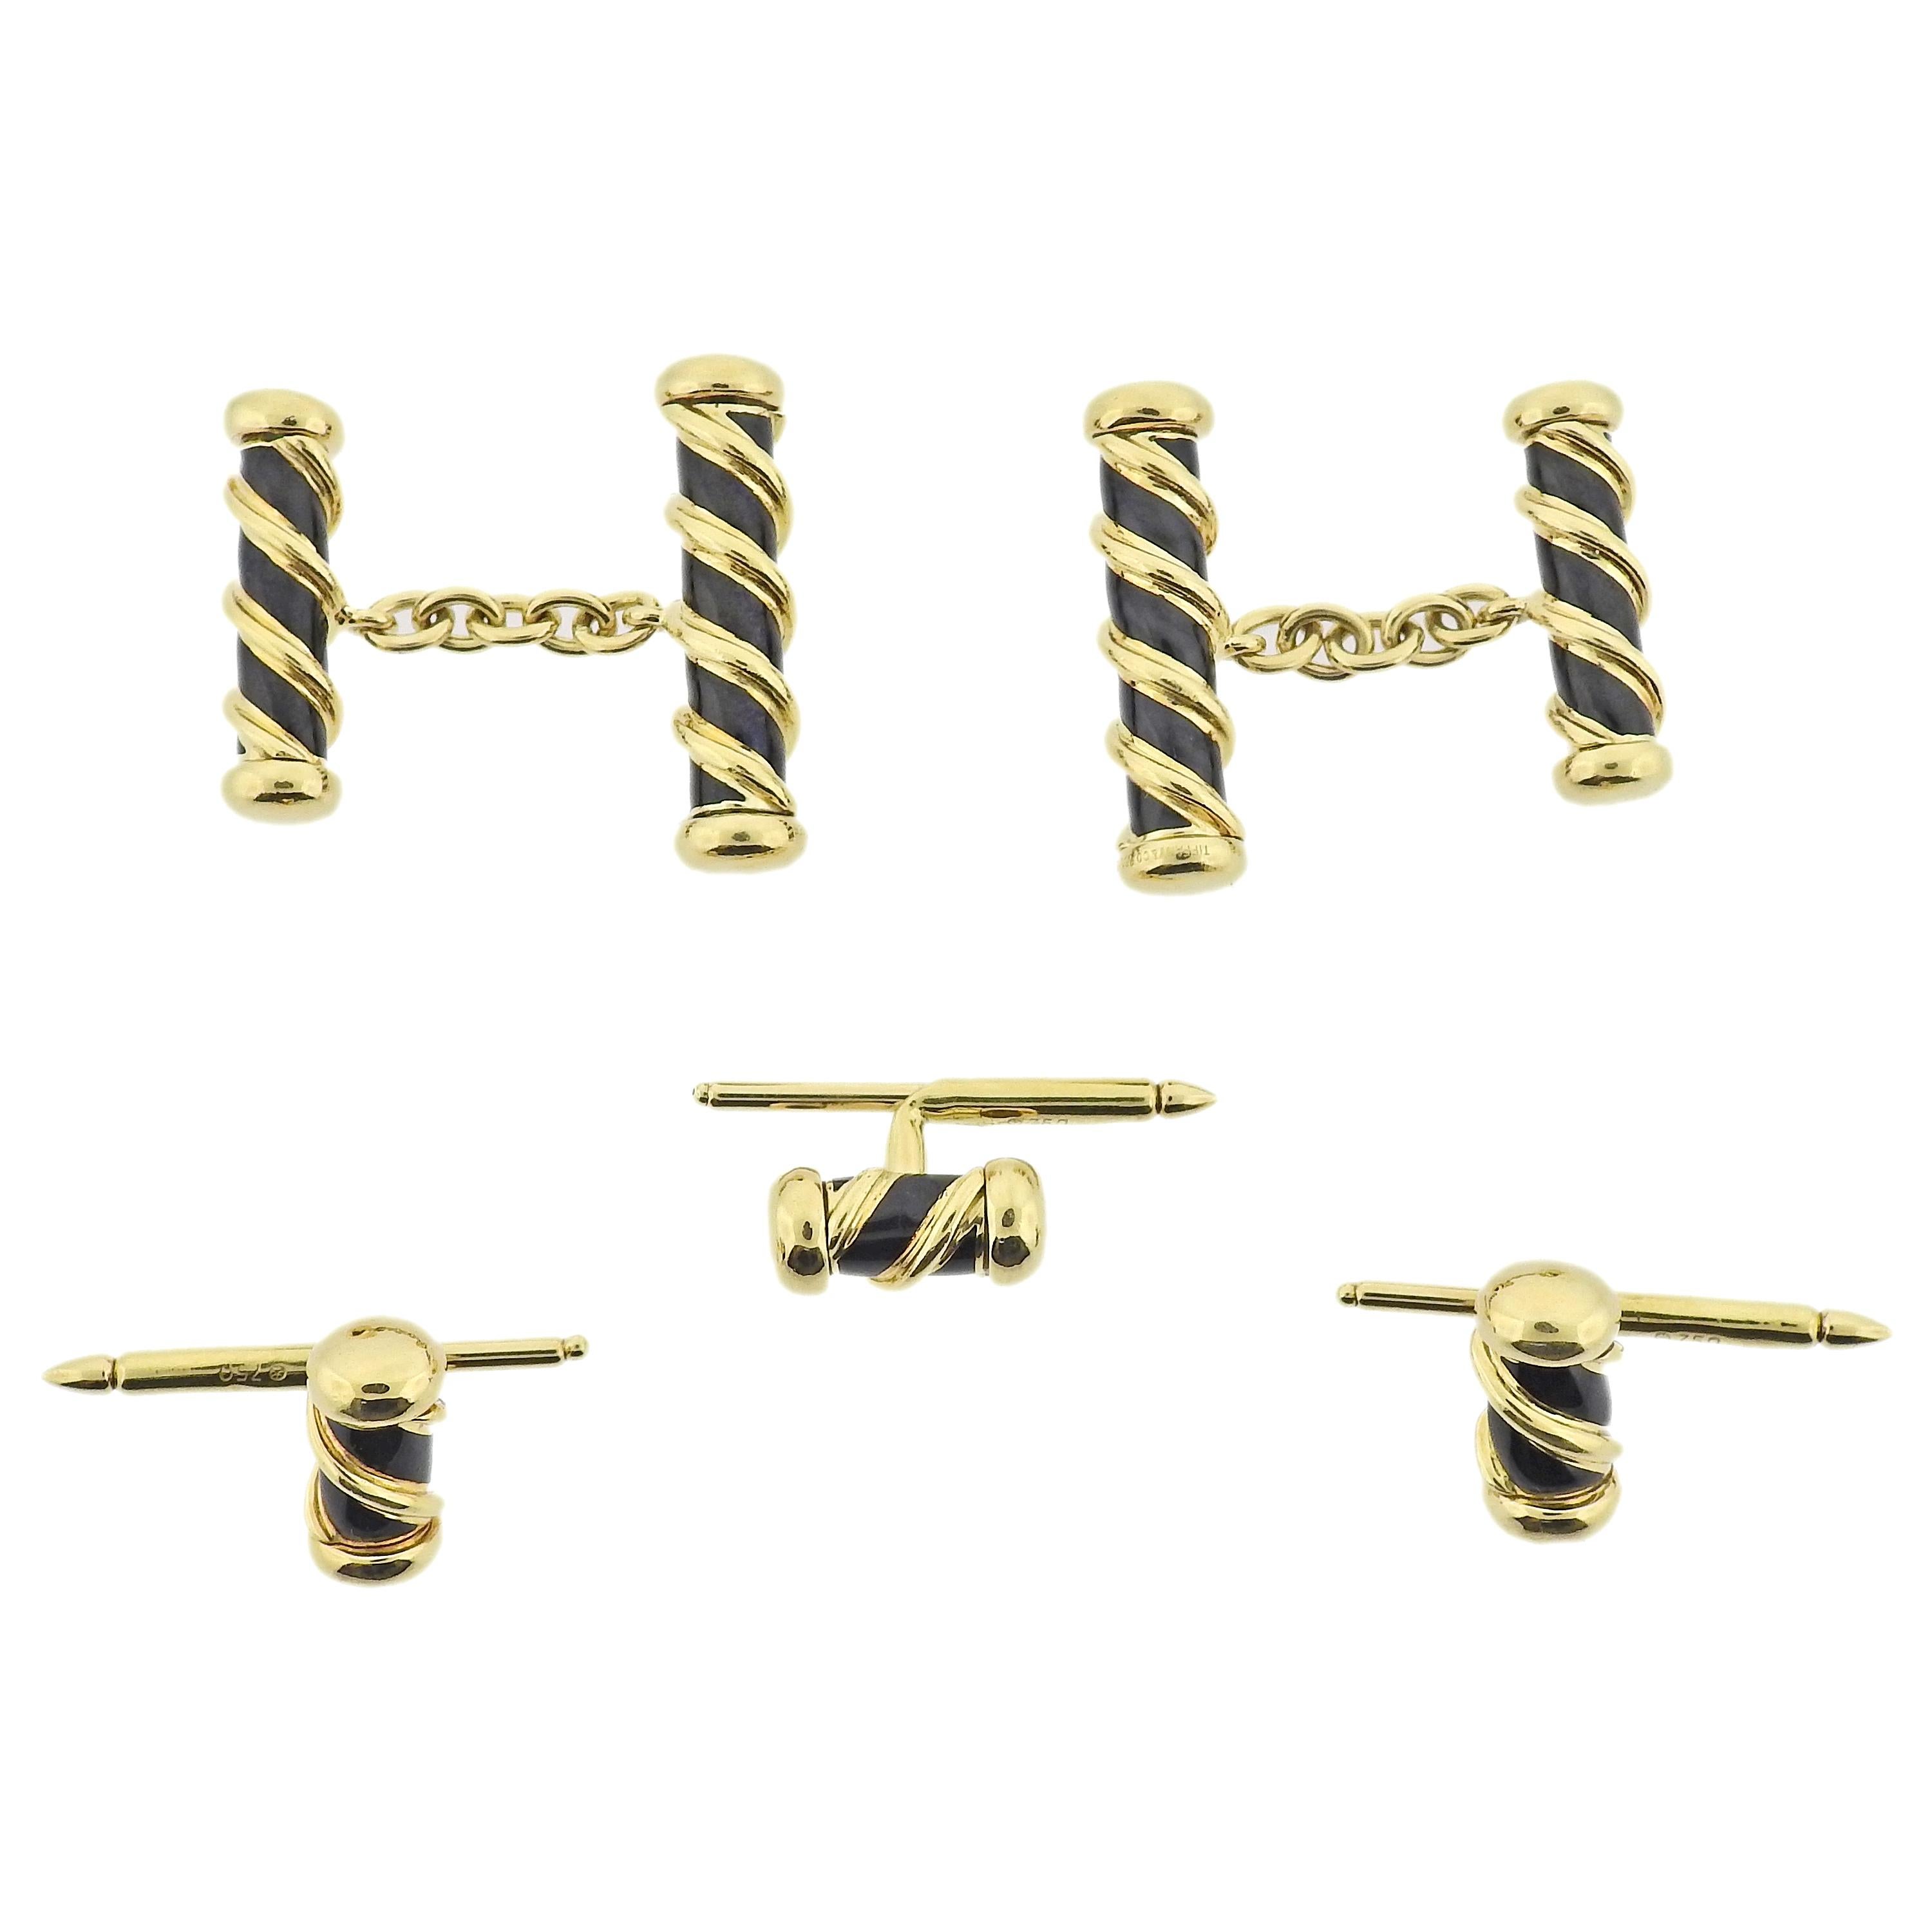 Tiffany & Co Schlumberger 18k gold scroll motif cufflinks and studs, decorated with black enamel.  Cufflink top is 25mm x 8mm, stud - 15mm x 7mm. Weight - 34.3 grams. Marked: Tiffany & Co, Schlumberger, 750. 